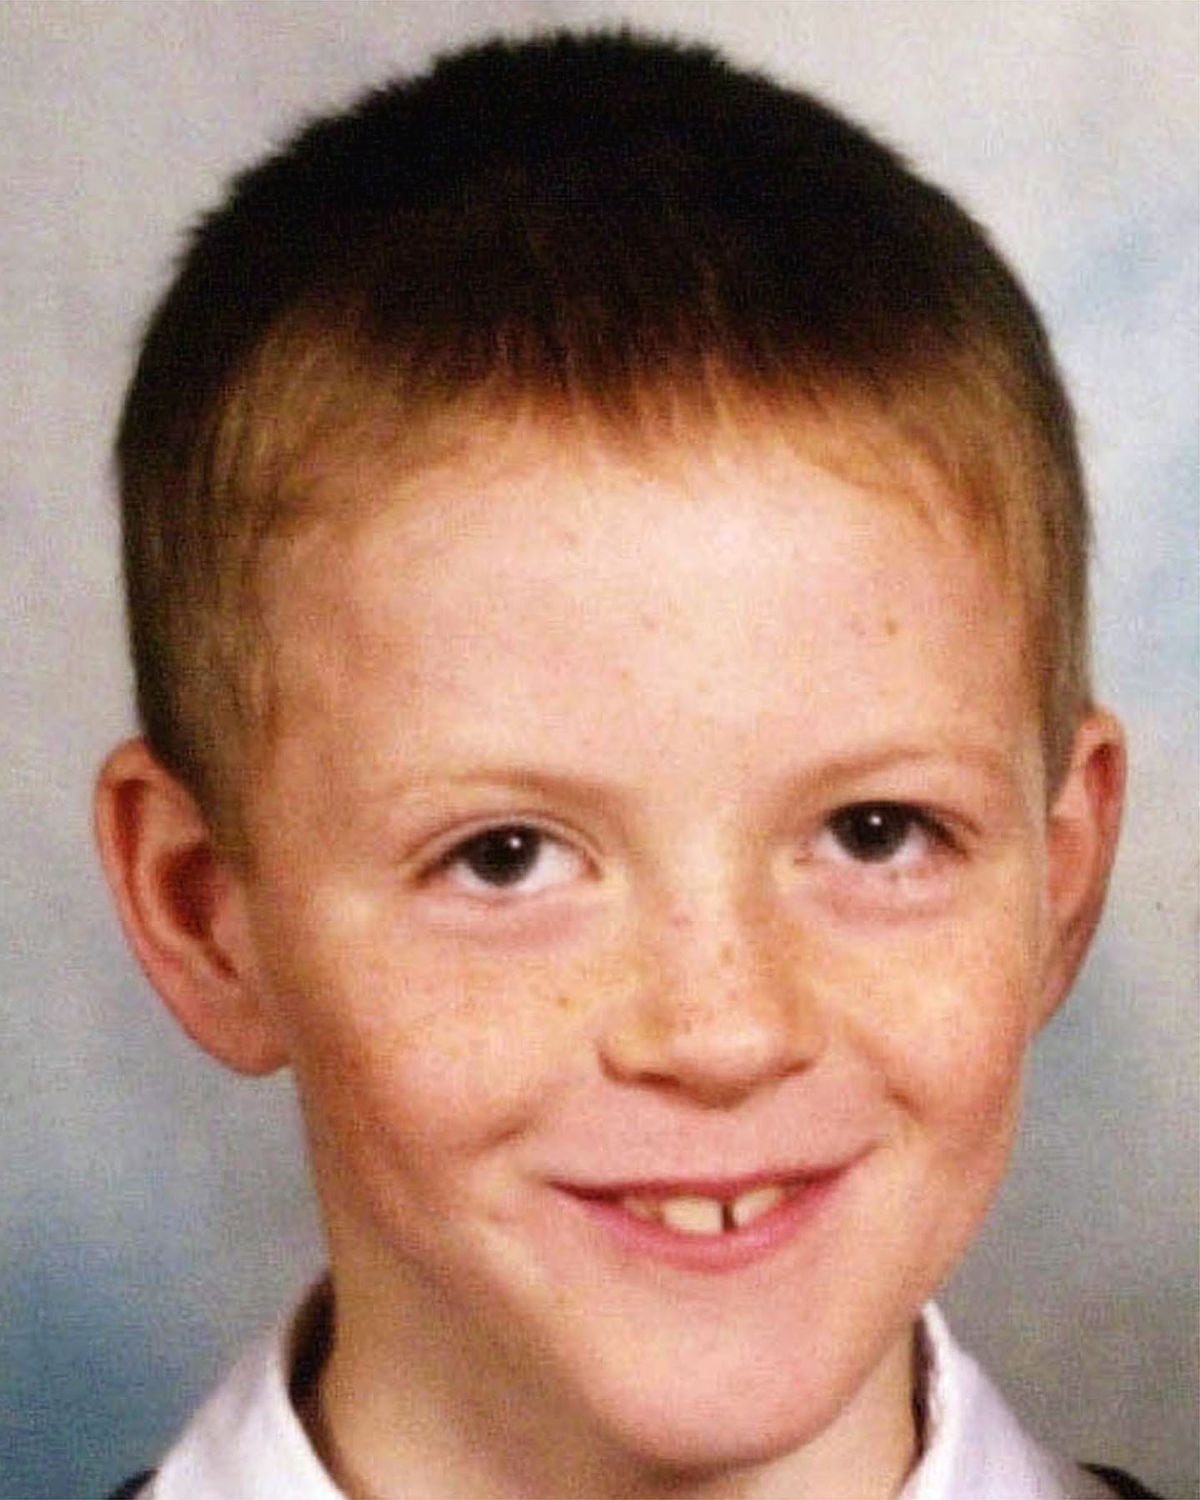 Craig Tranter was the youngest to die, aged 13